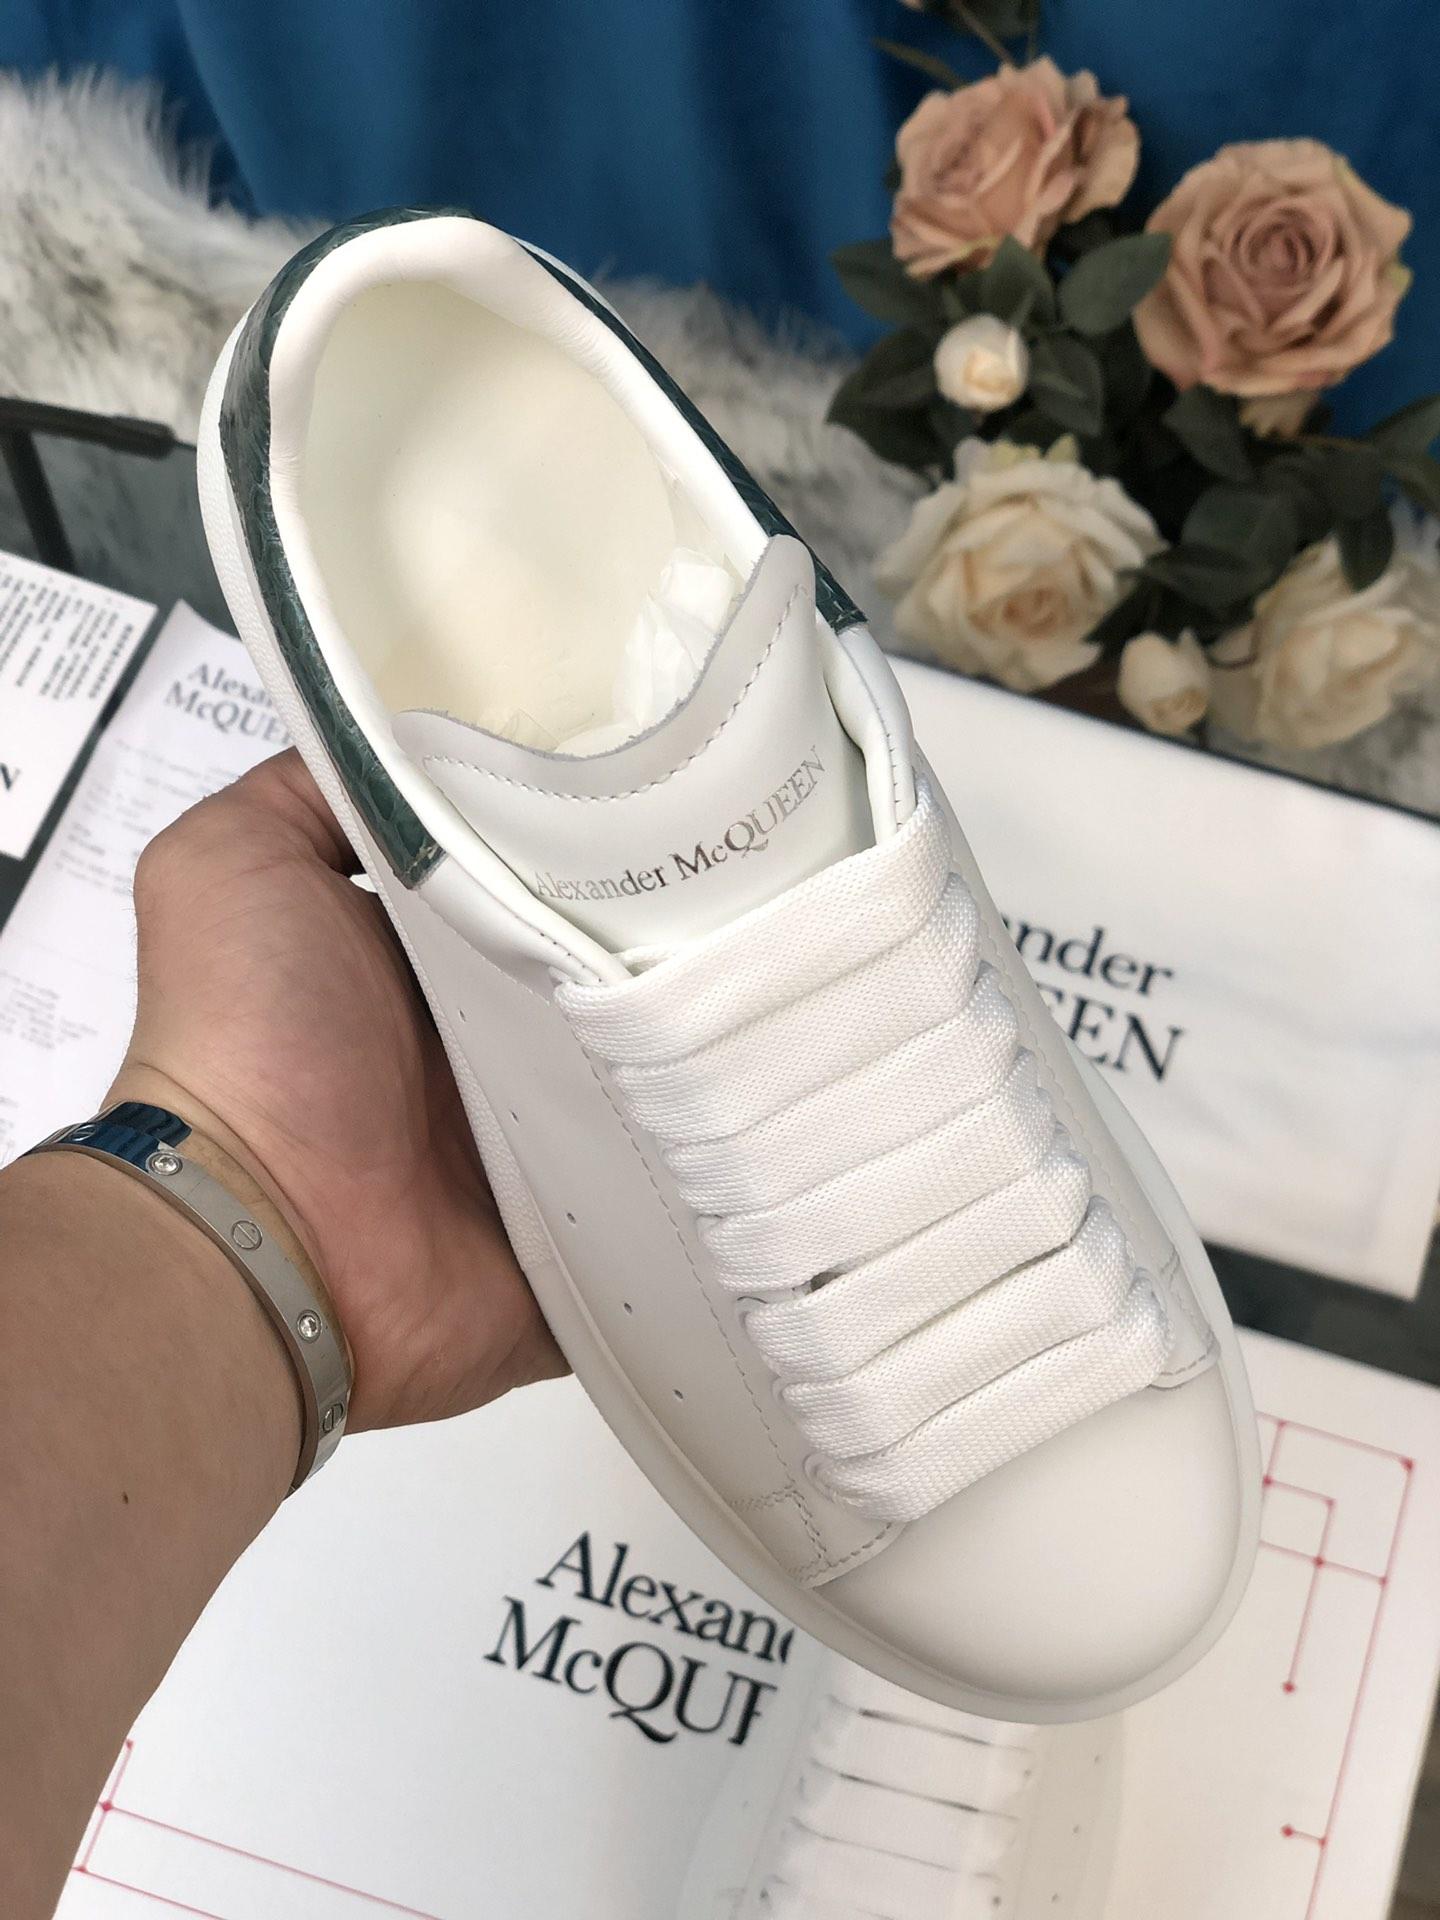 Alexander McQueen Fahion Sneakers White with green snake heel MS100008